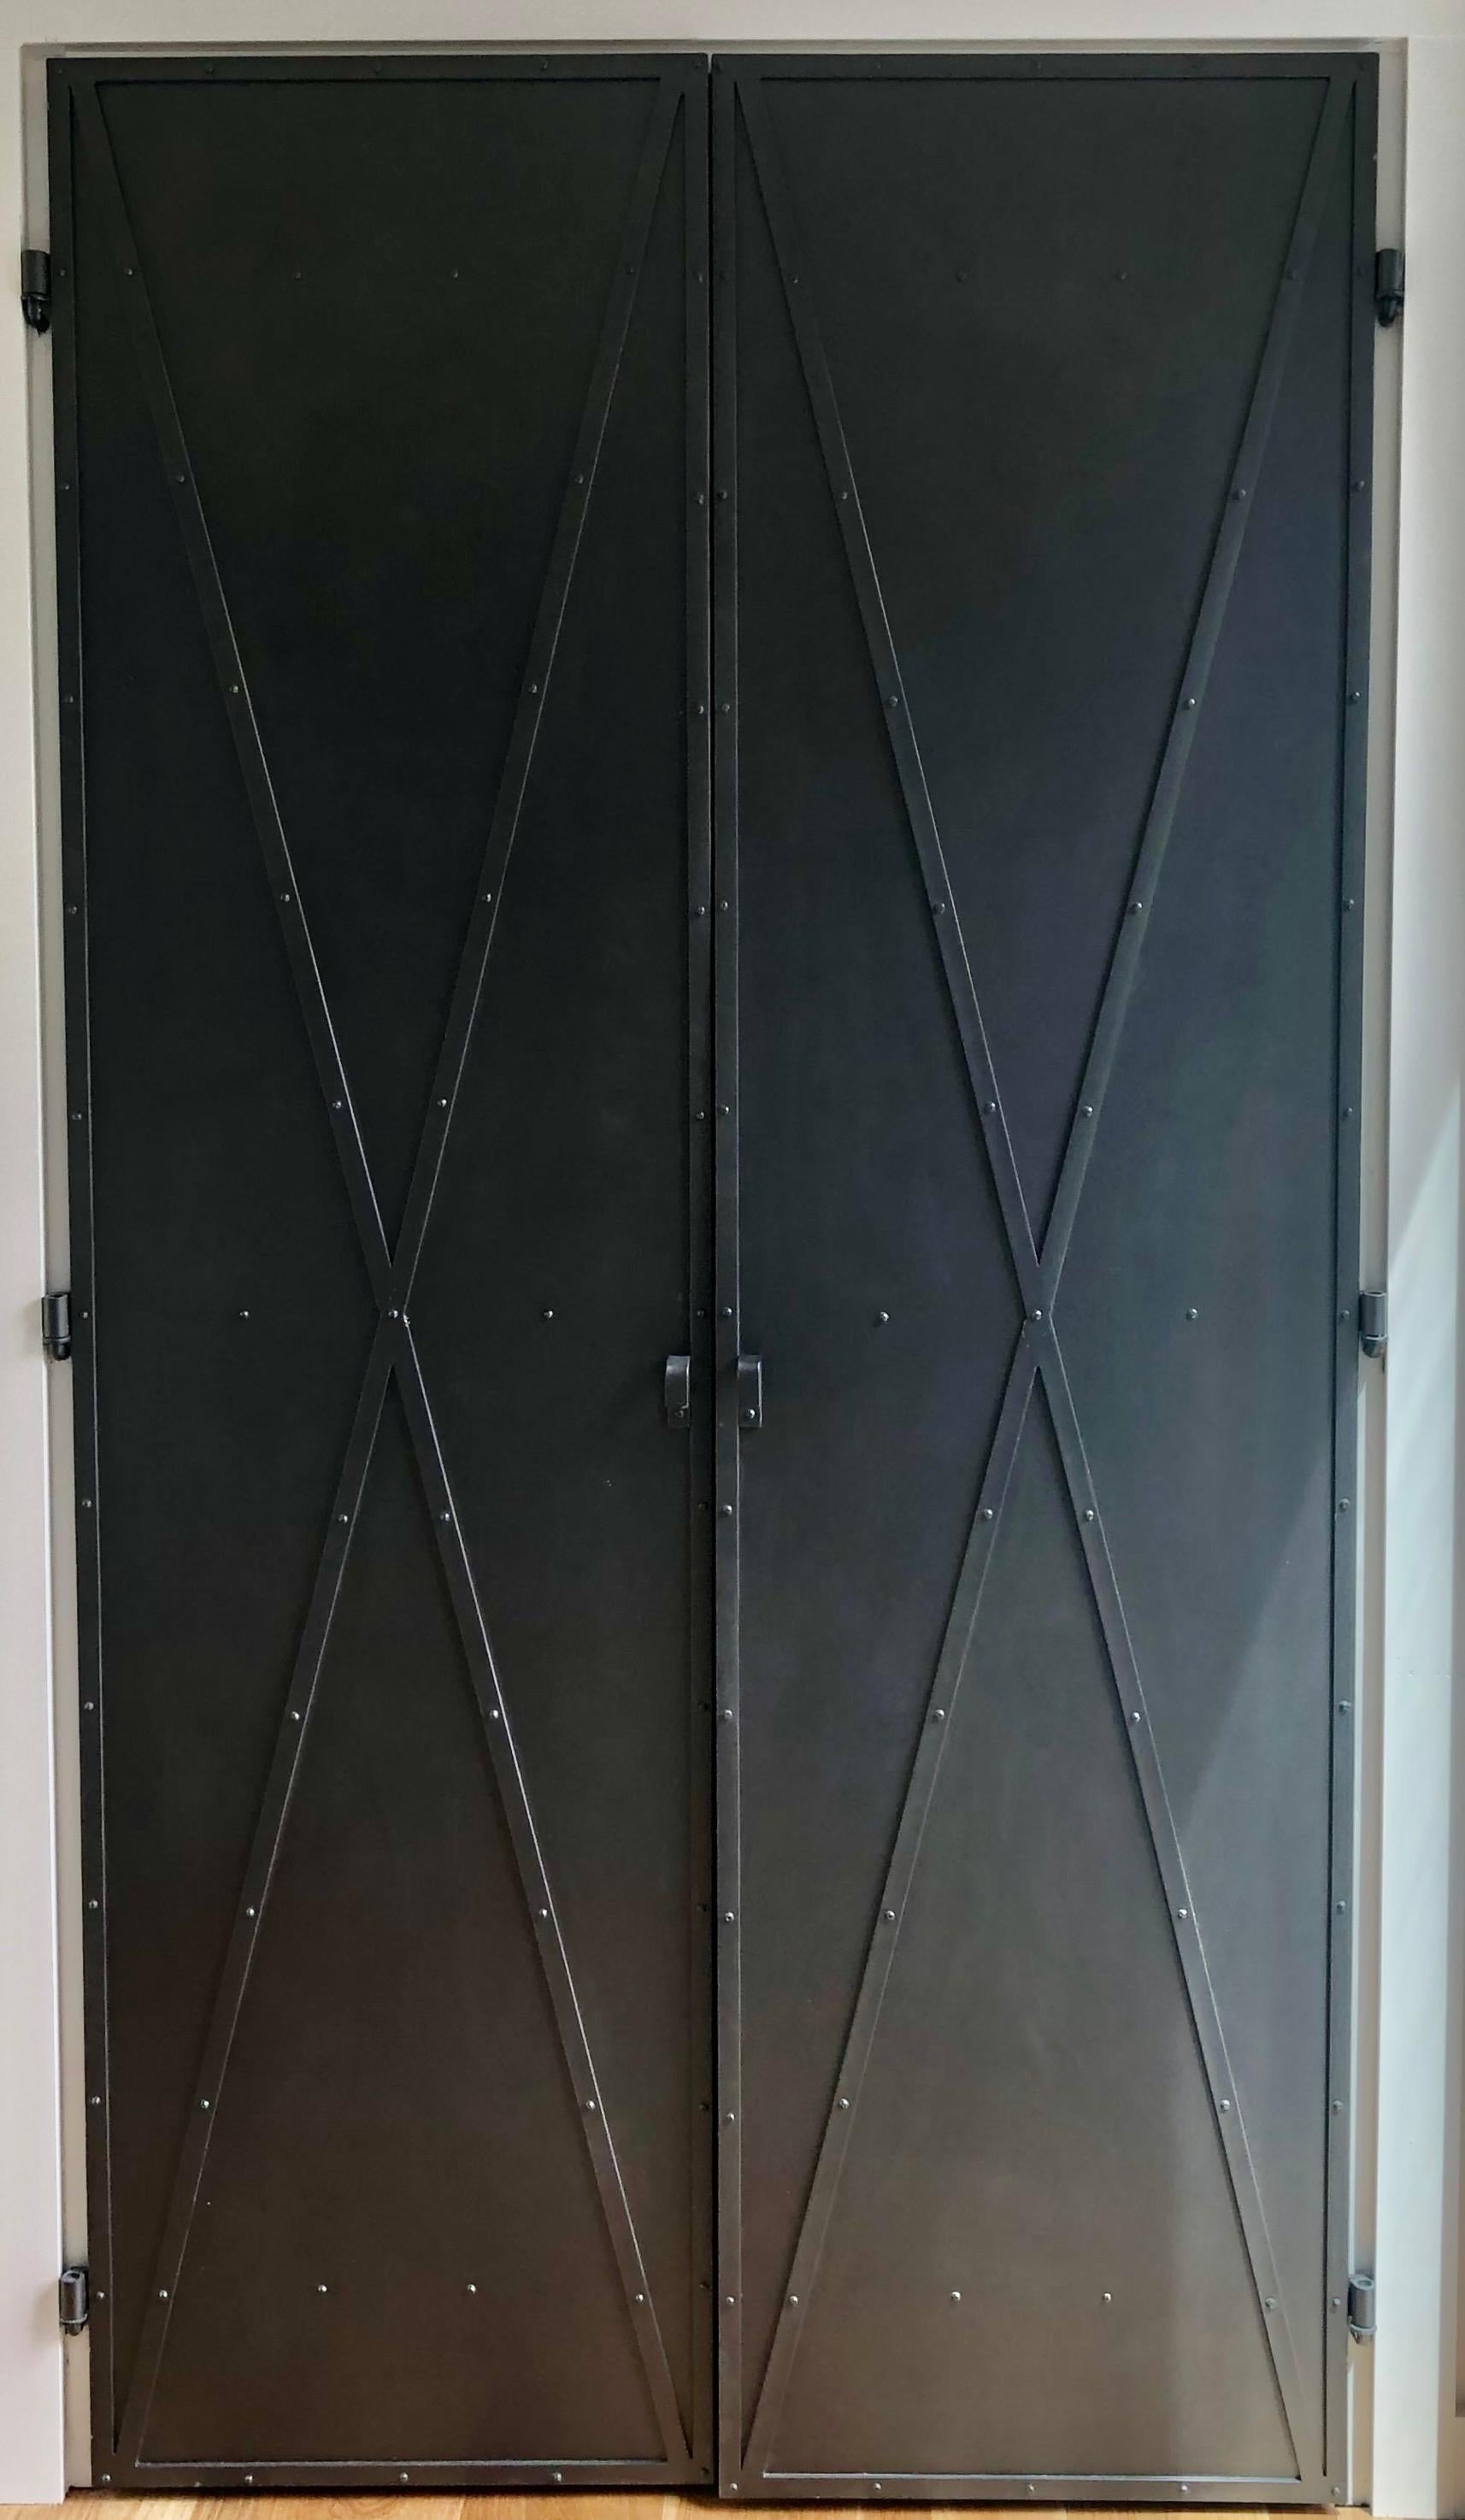 Make it the size you need. Add interest and character to your next new building or renovation project. These neoclassical style doors are made of steel. Other finishes available. 
These particular doors are 21